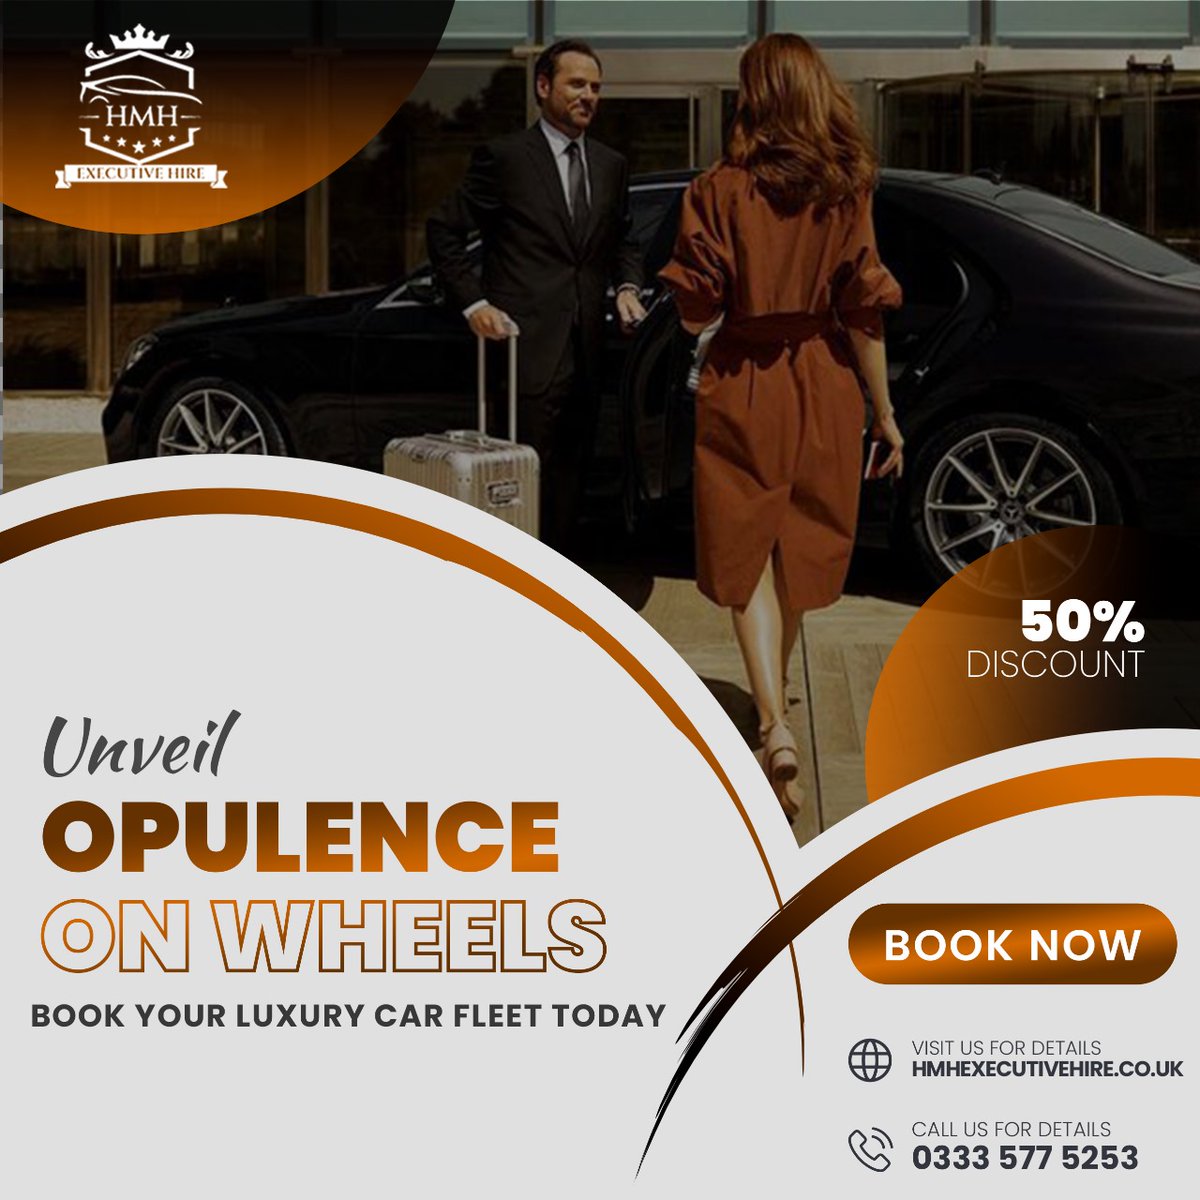 Unveil opulence on wheels with HMH Executive Hire. Elevate your travel experience with our premium fleet, where luxury meets the open road. Make a statement wherever you go. 🌟🚗 #HMHExecutiveHire #OpulenceOnWheels #LuxuryTravel